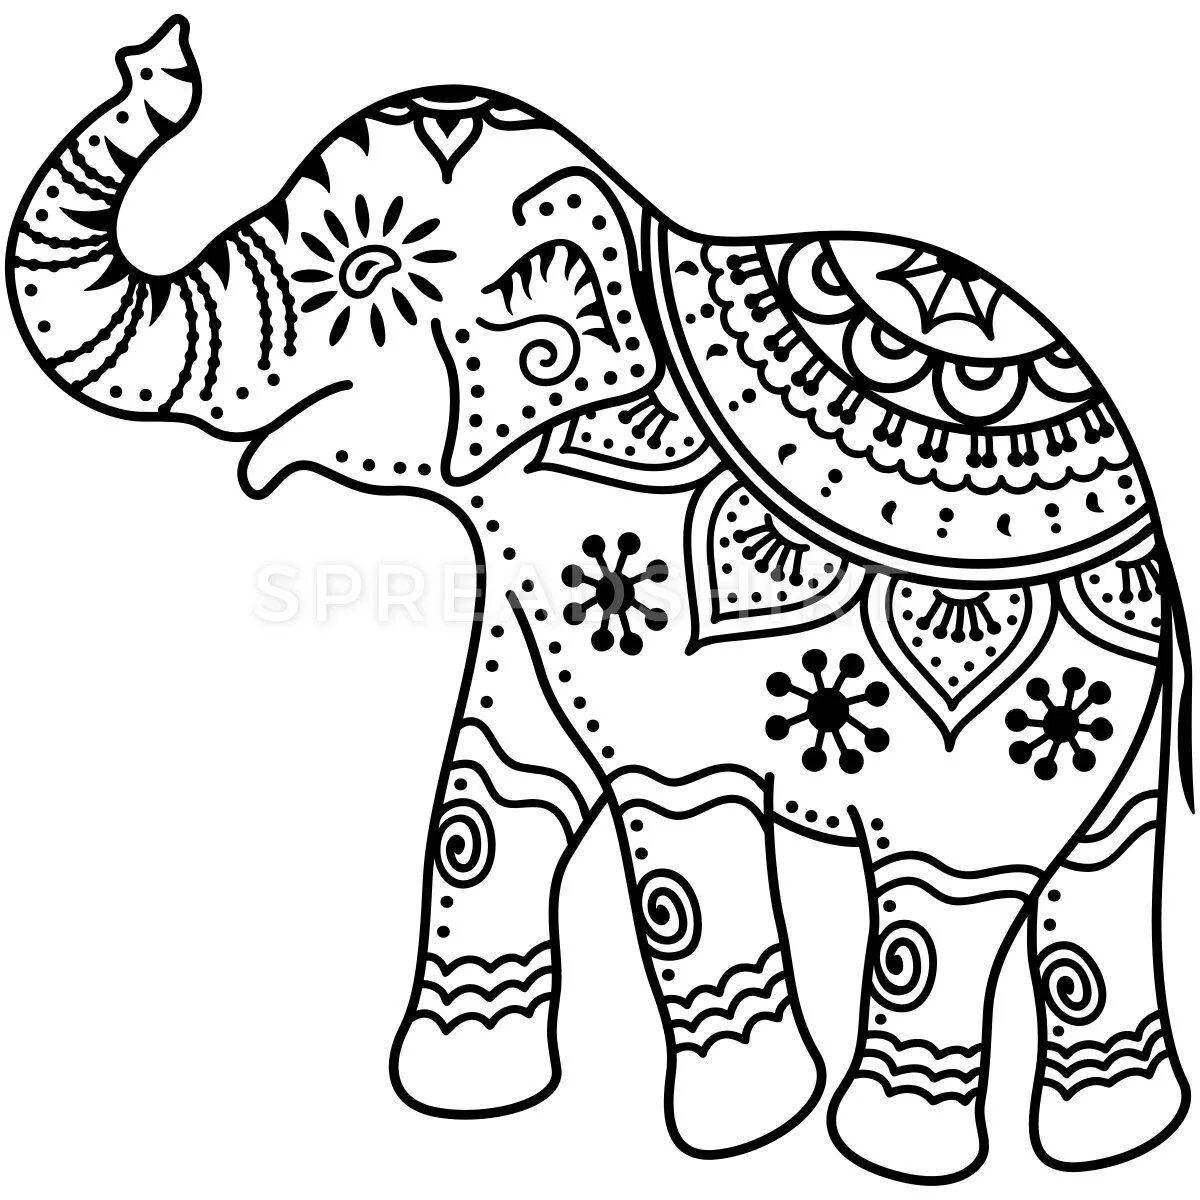 Adorable Indian elephant coloring book for kids